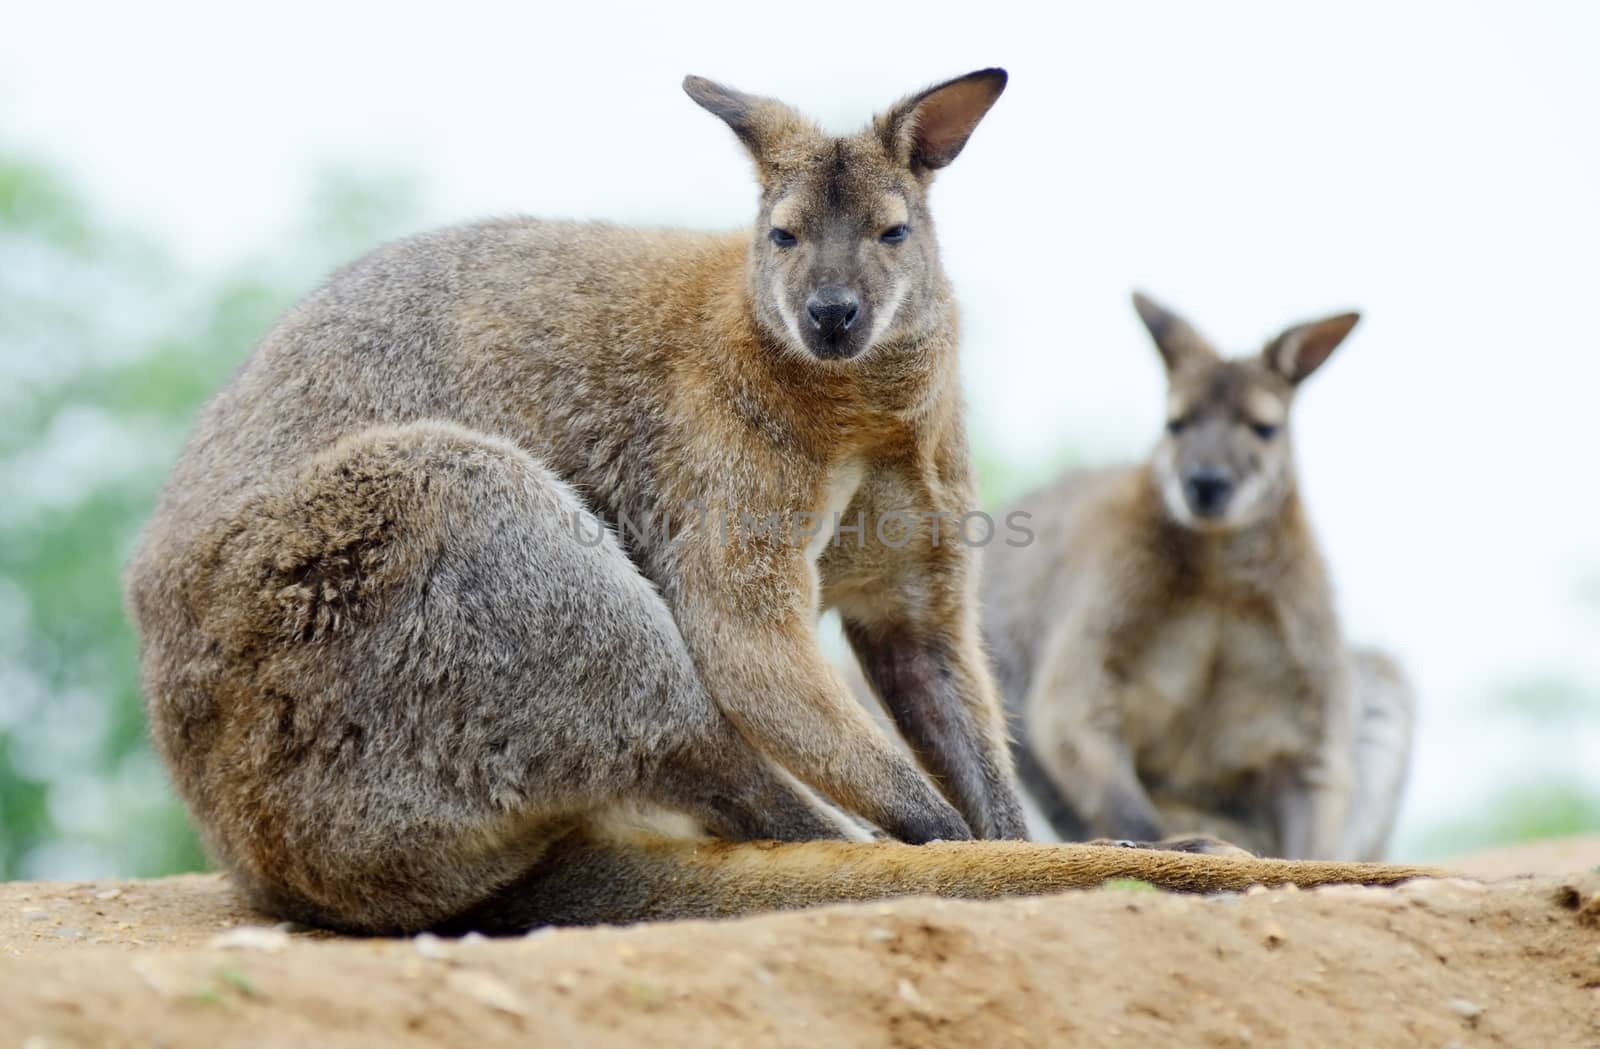 Wallabies by kmwphotography